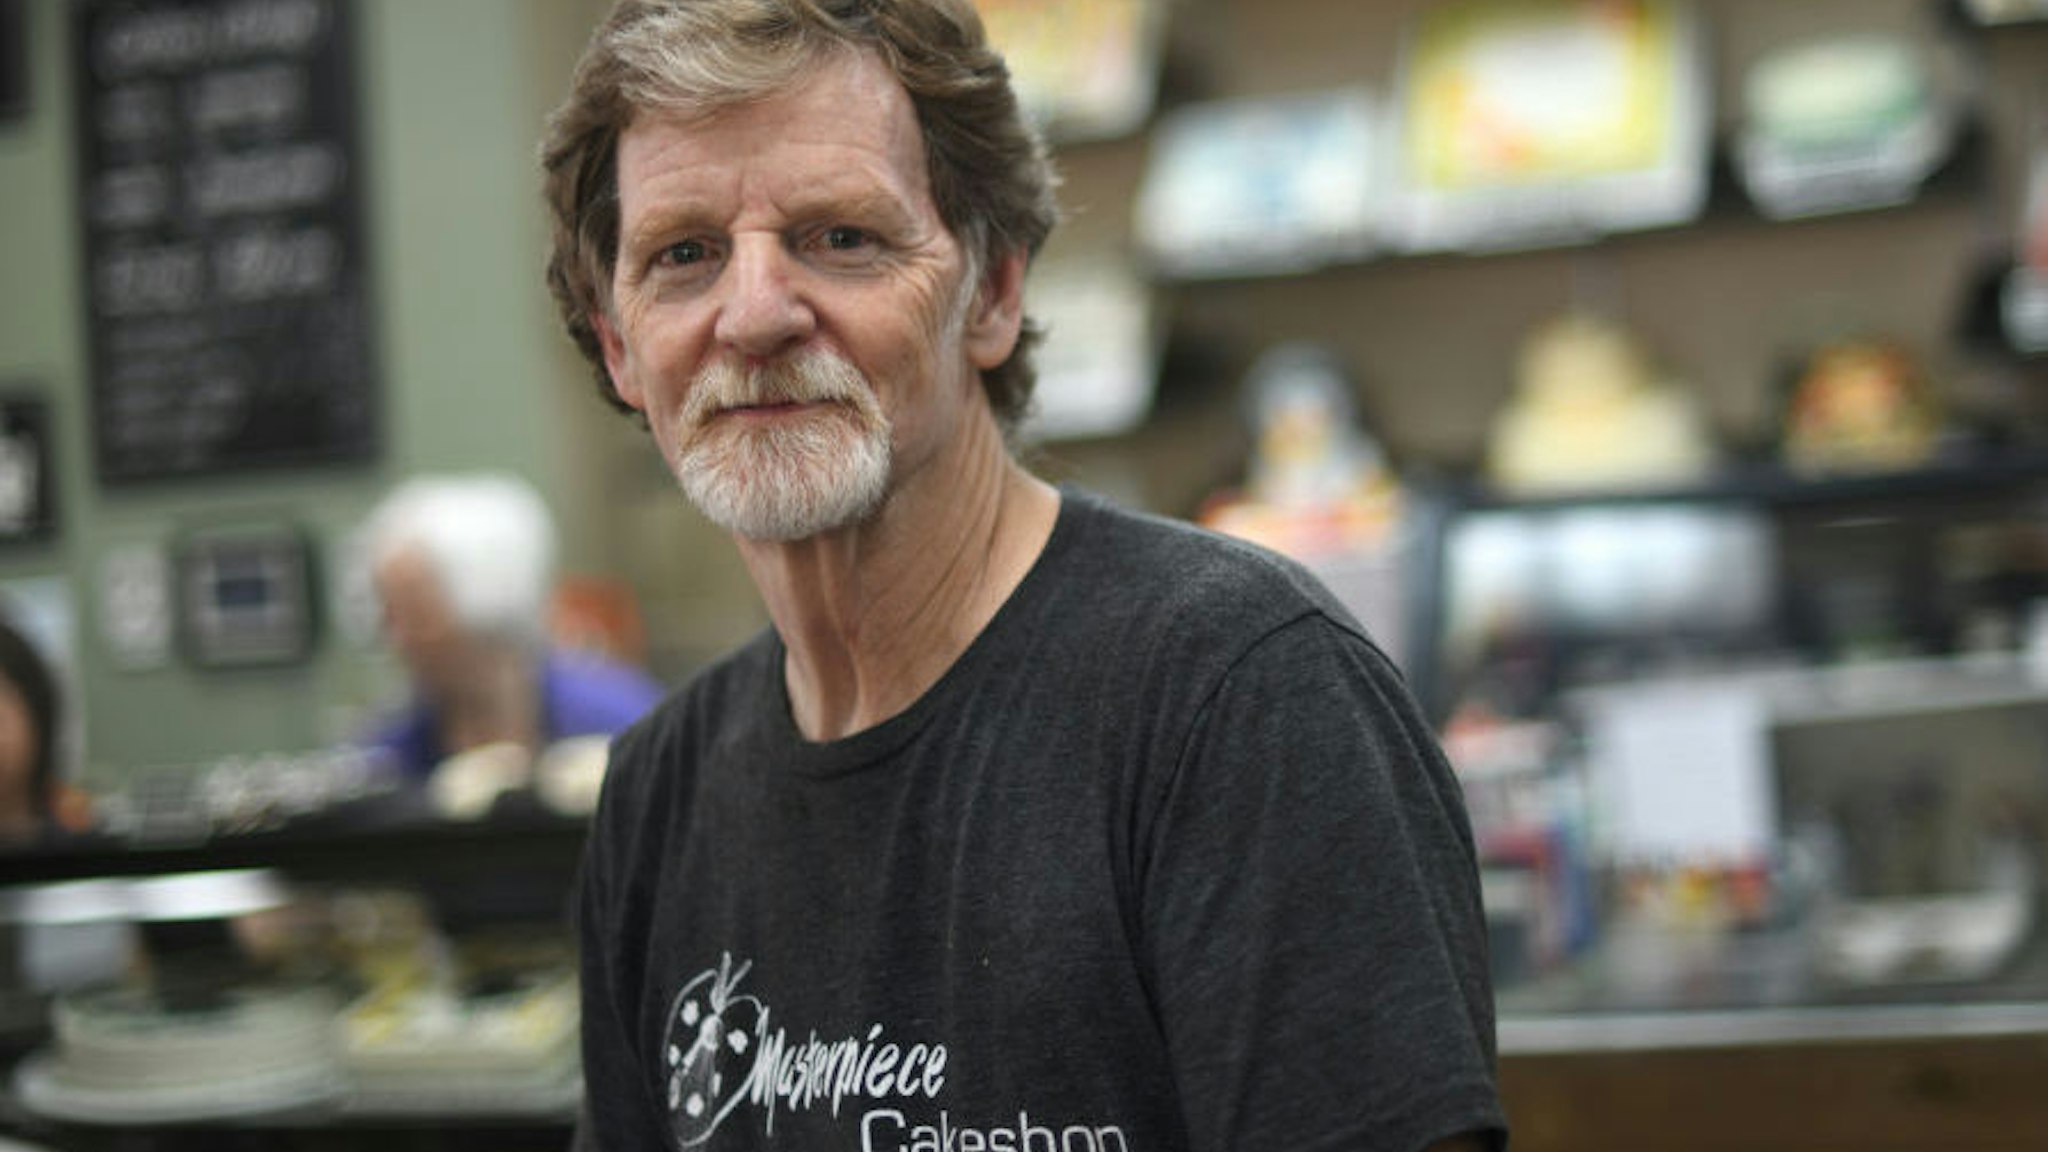 Baker Jack Phillips, owner of Masterpiece Cakeshop, manages his shop in Lakewood, Colo. August 15, 2018.